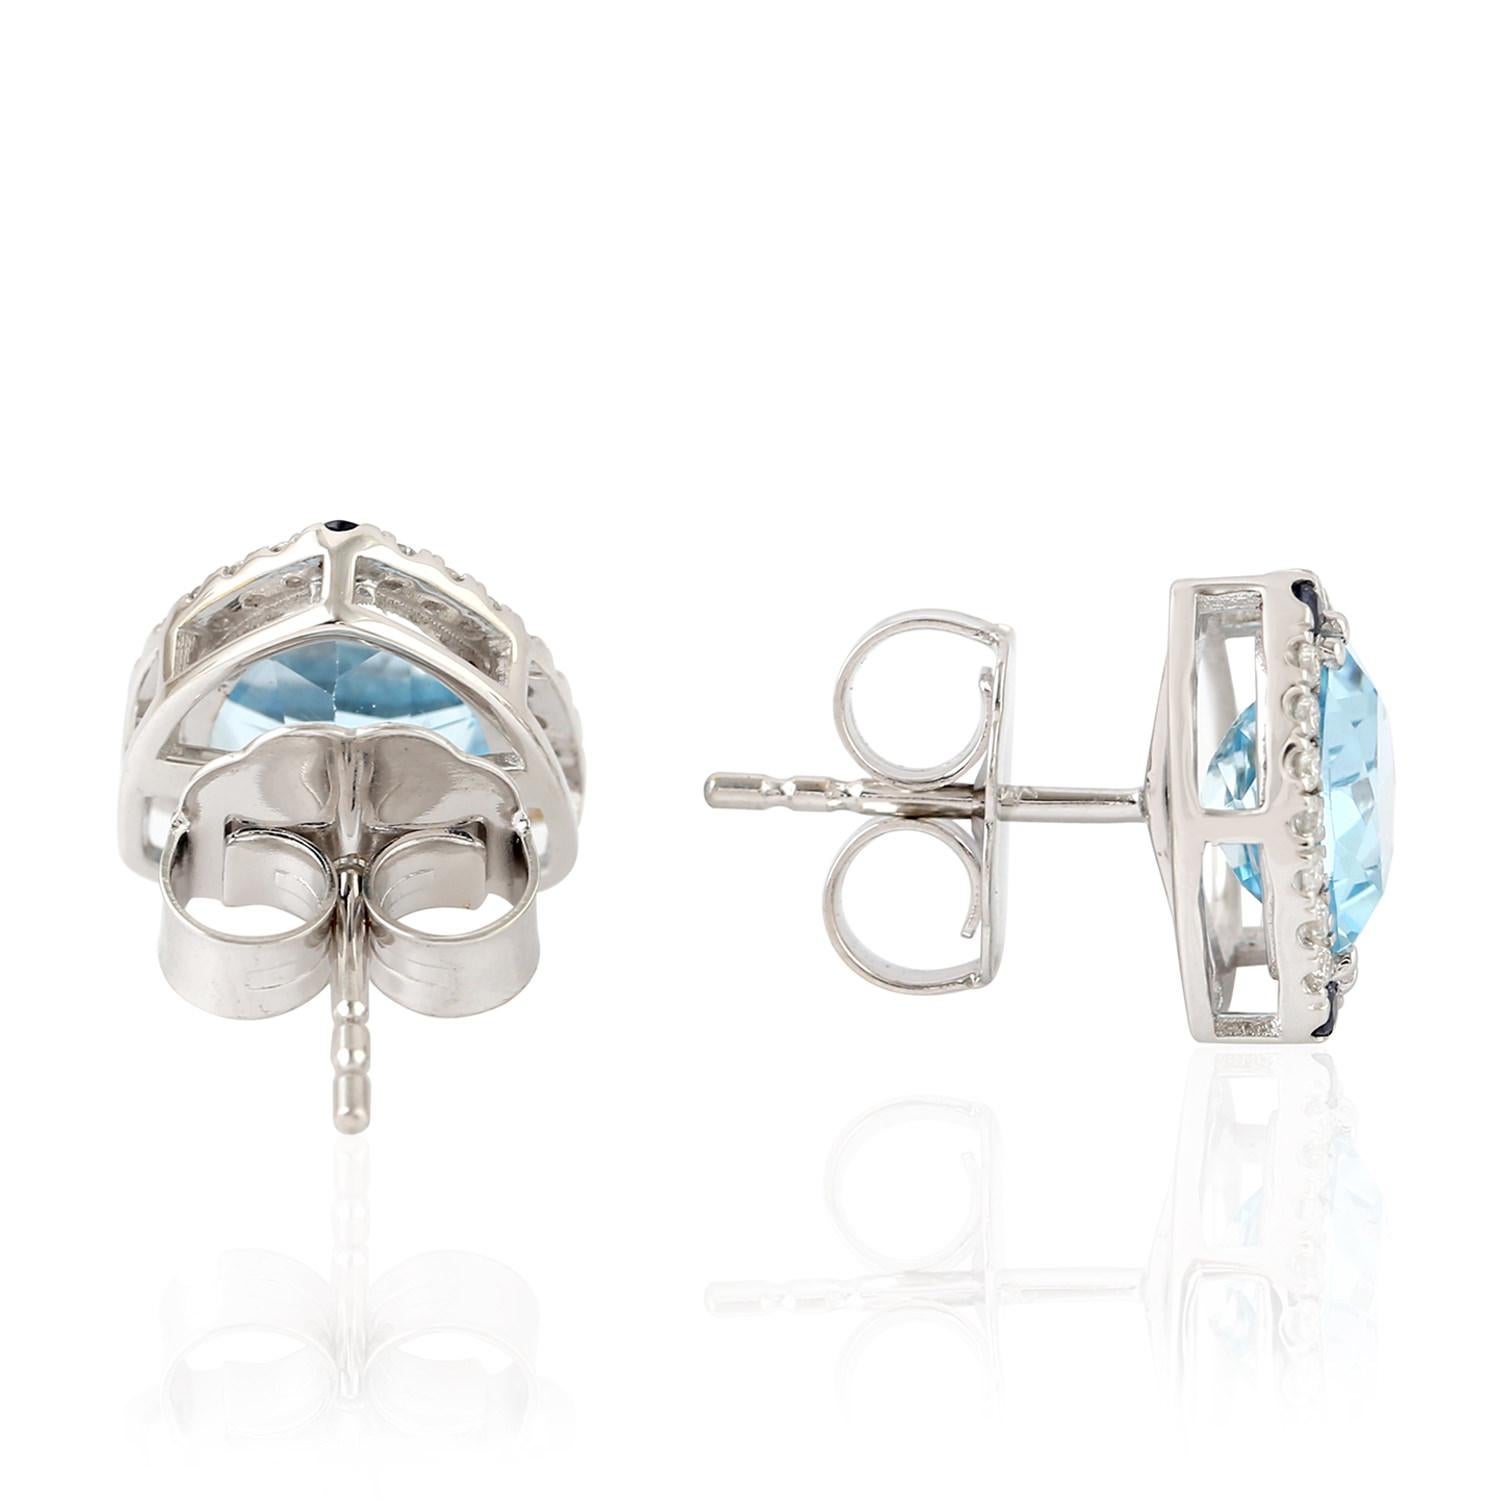 Cast from 18-karat gold.  These beautiful stud earrings are hand set with 4.41 carats blue topaz, .05 carats blue sapphire & .29 carats of sparkling diamonds.  

FOLLOW  MEGHNA JEWELS storefront to view the latest collection & exclusive pieces. 